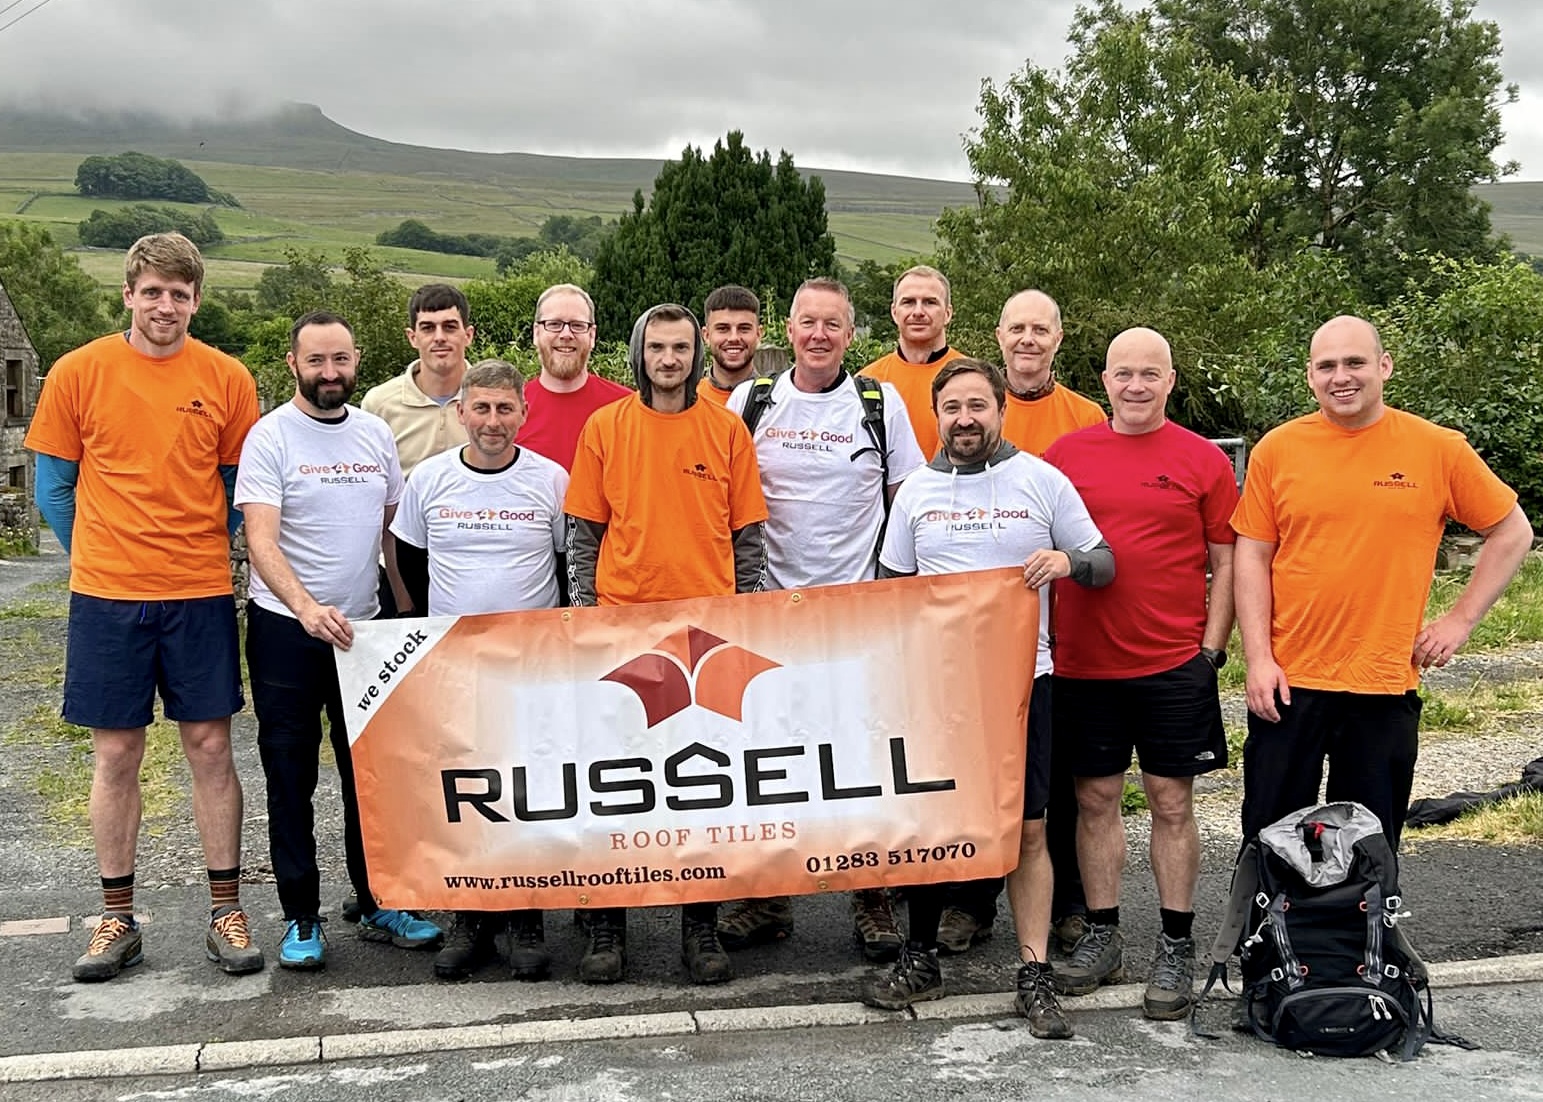 Russell Roof Tiles continues community work